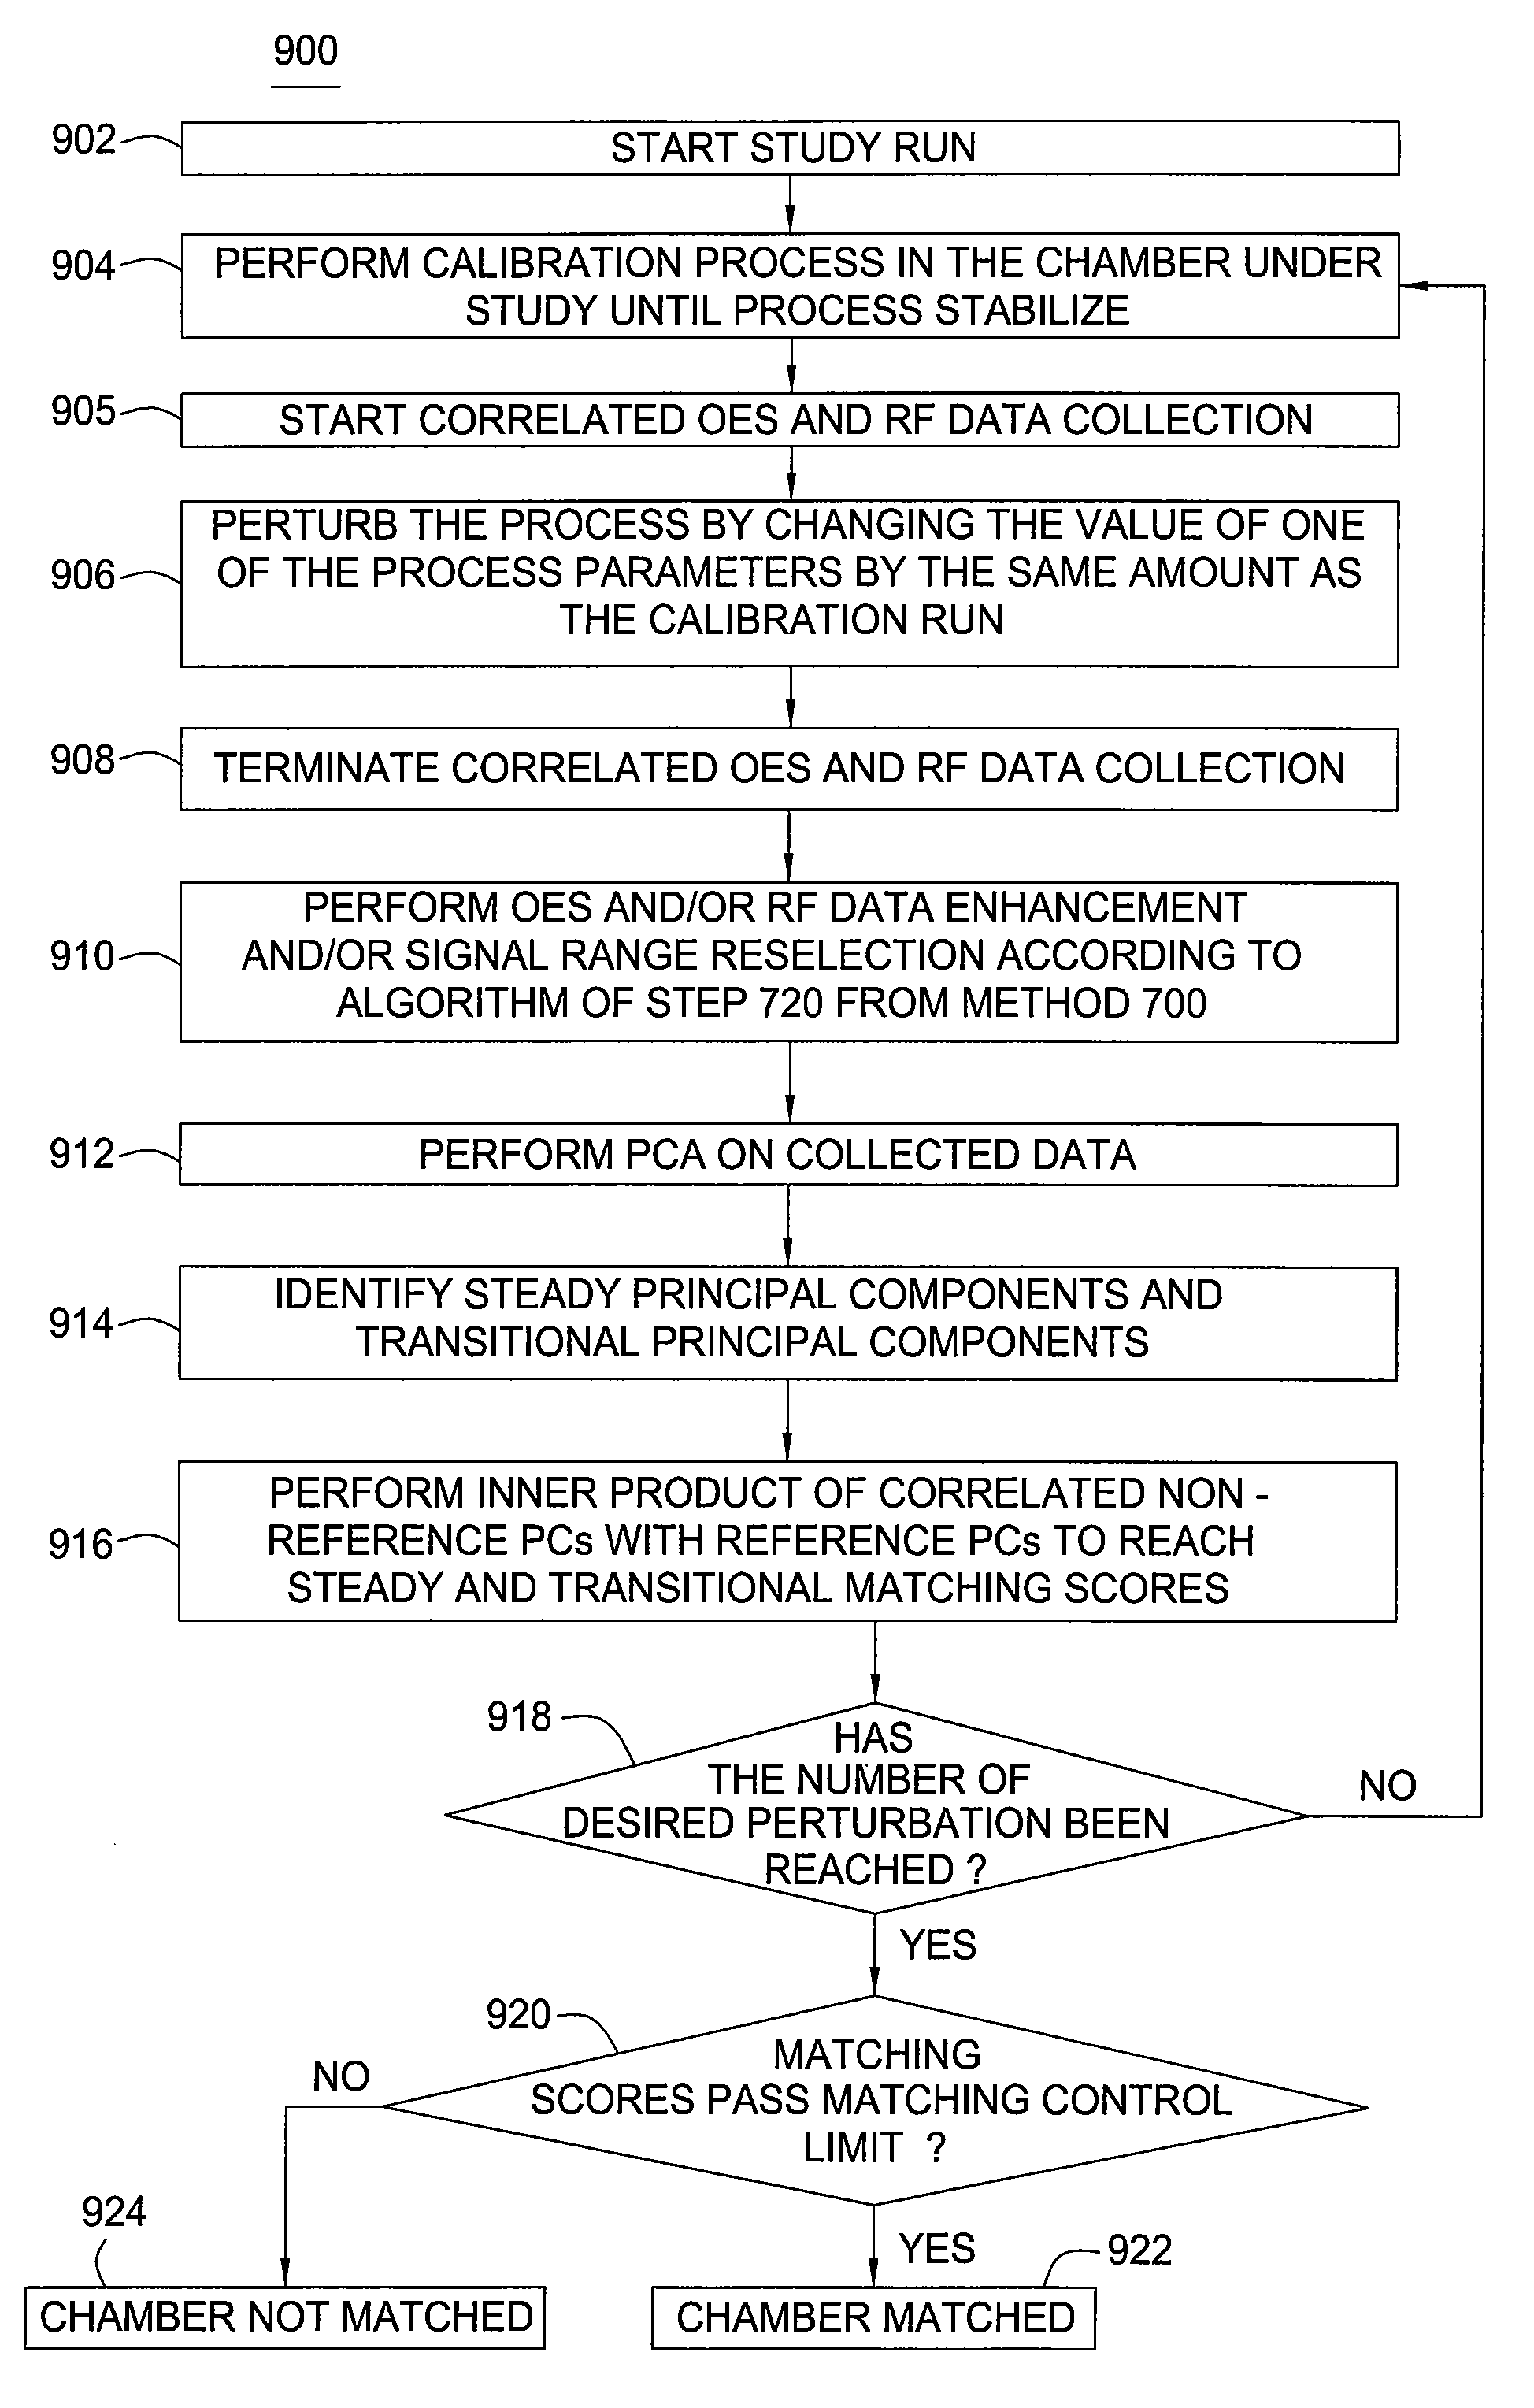 Method for automatic determination of semiconductor plasma chamber matching and source of fault by comprehensive plasma monitoring